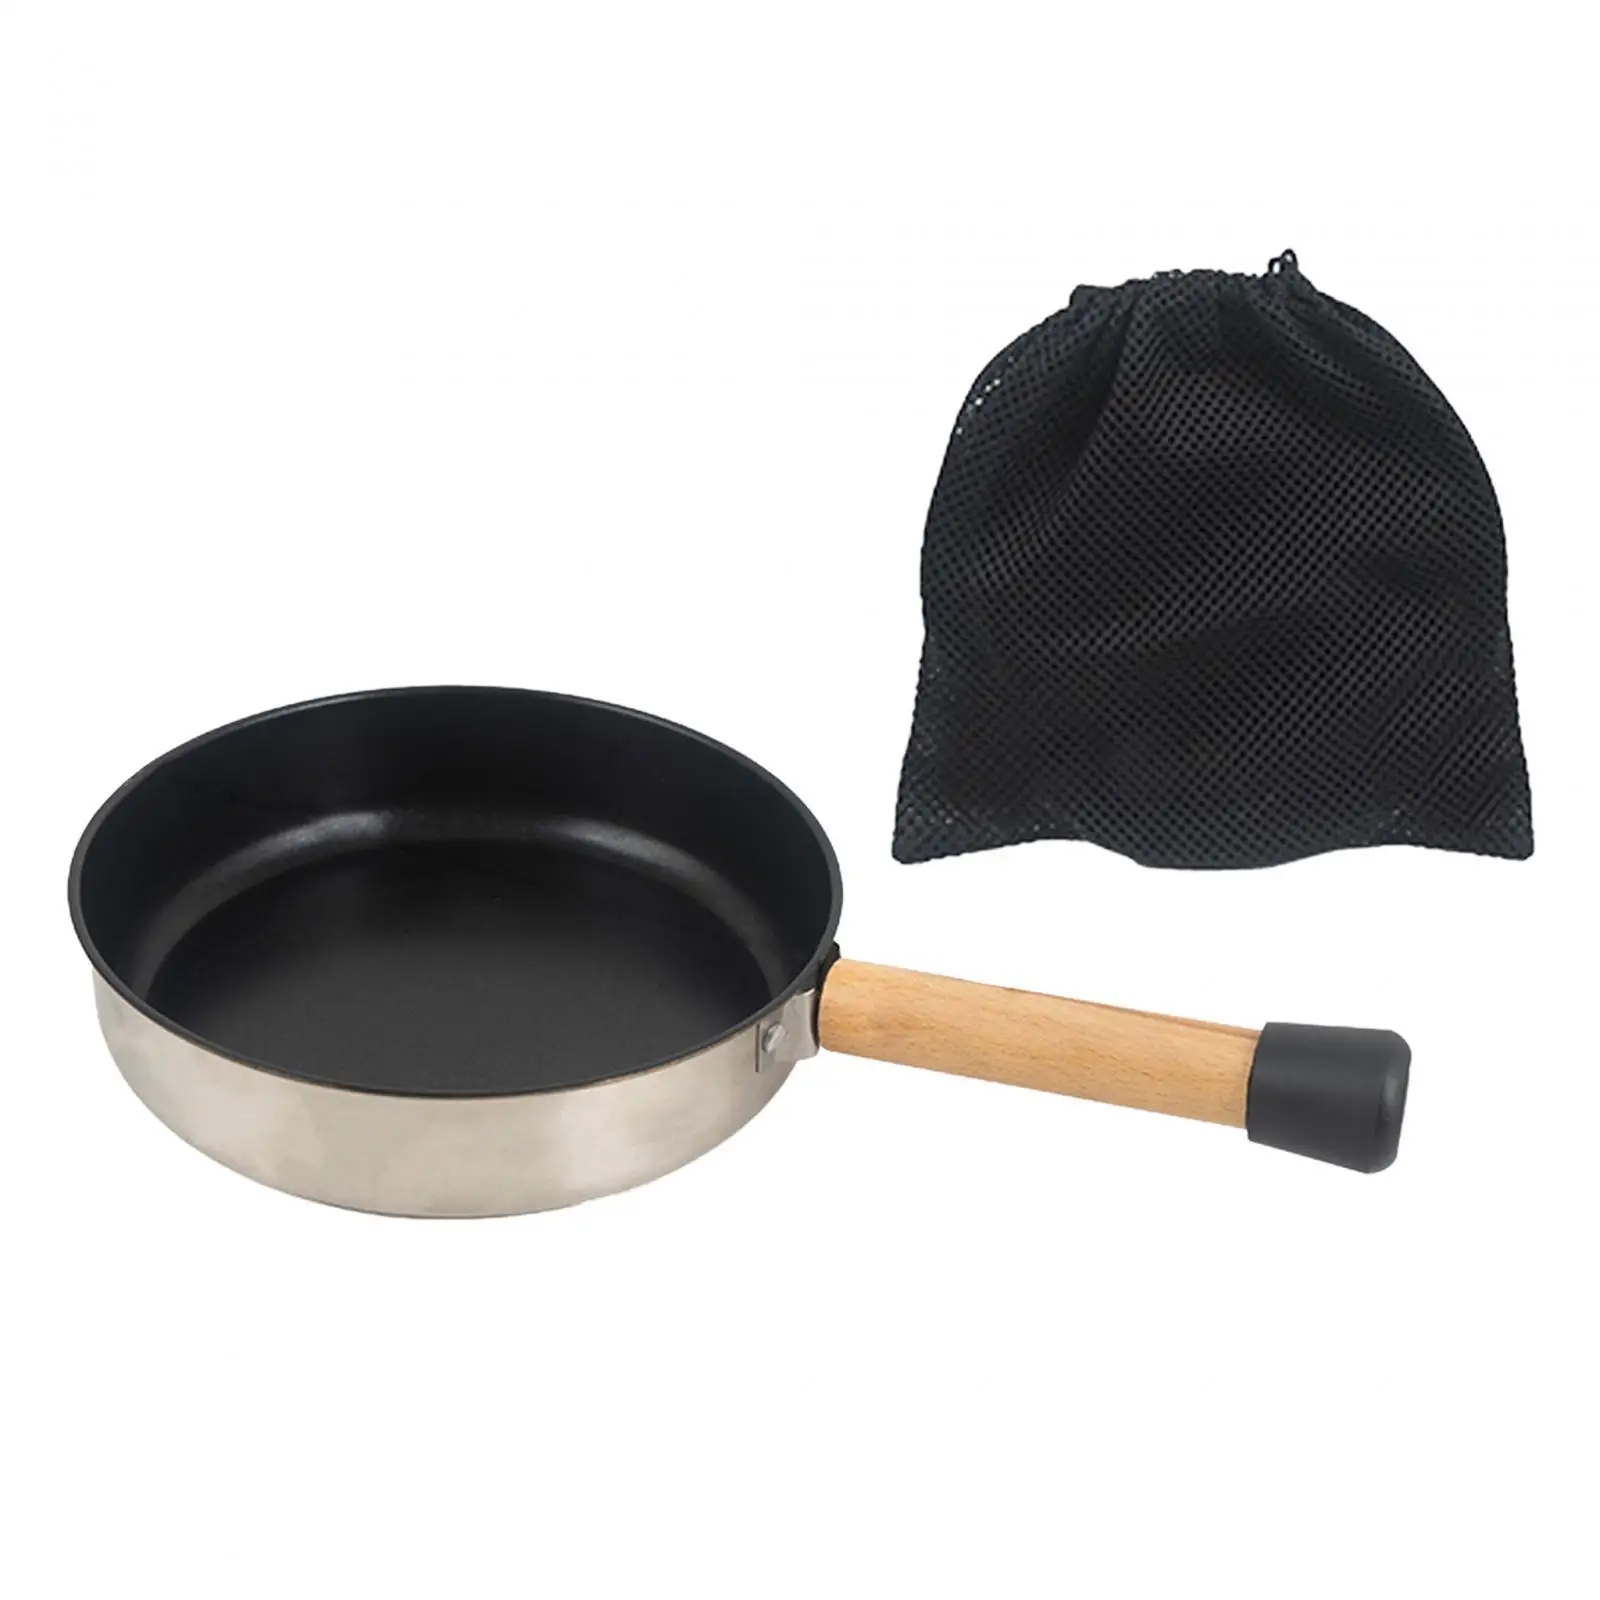 Camping Frying Pan Equipment Portable Fry Pan Nonstick Flat Griddle Pan for